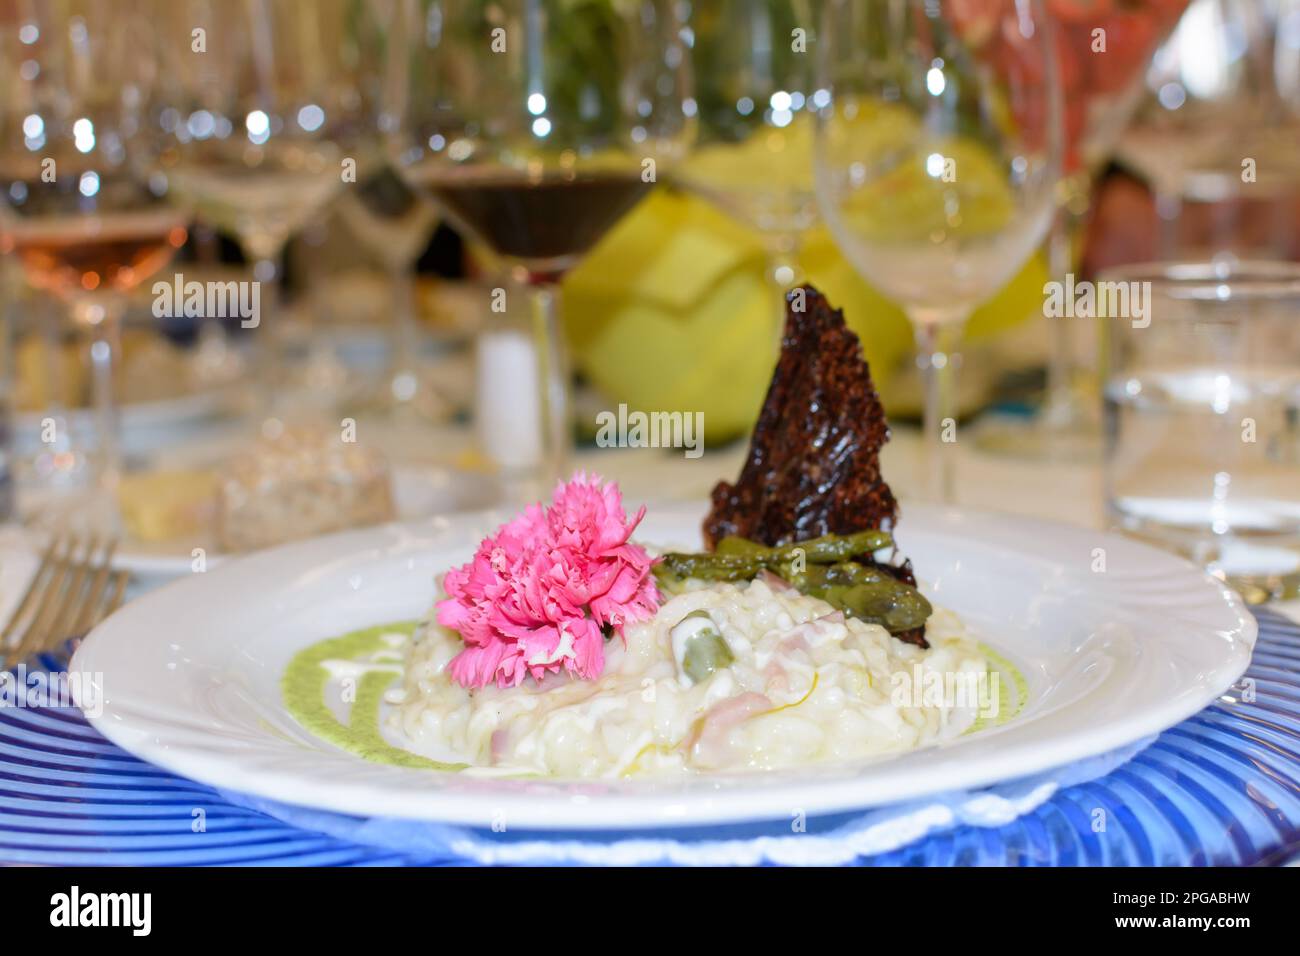 plate of warm risotto with spinach cream, typical of northern Italy, served in an elegant way Stock Photo